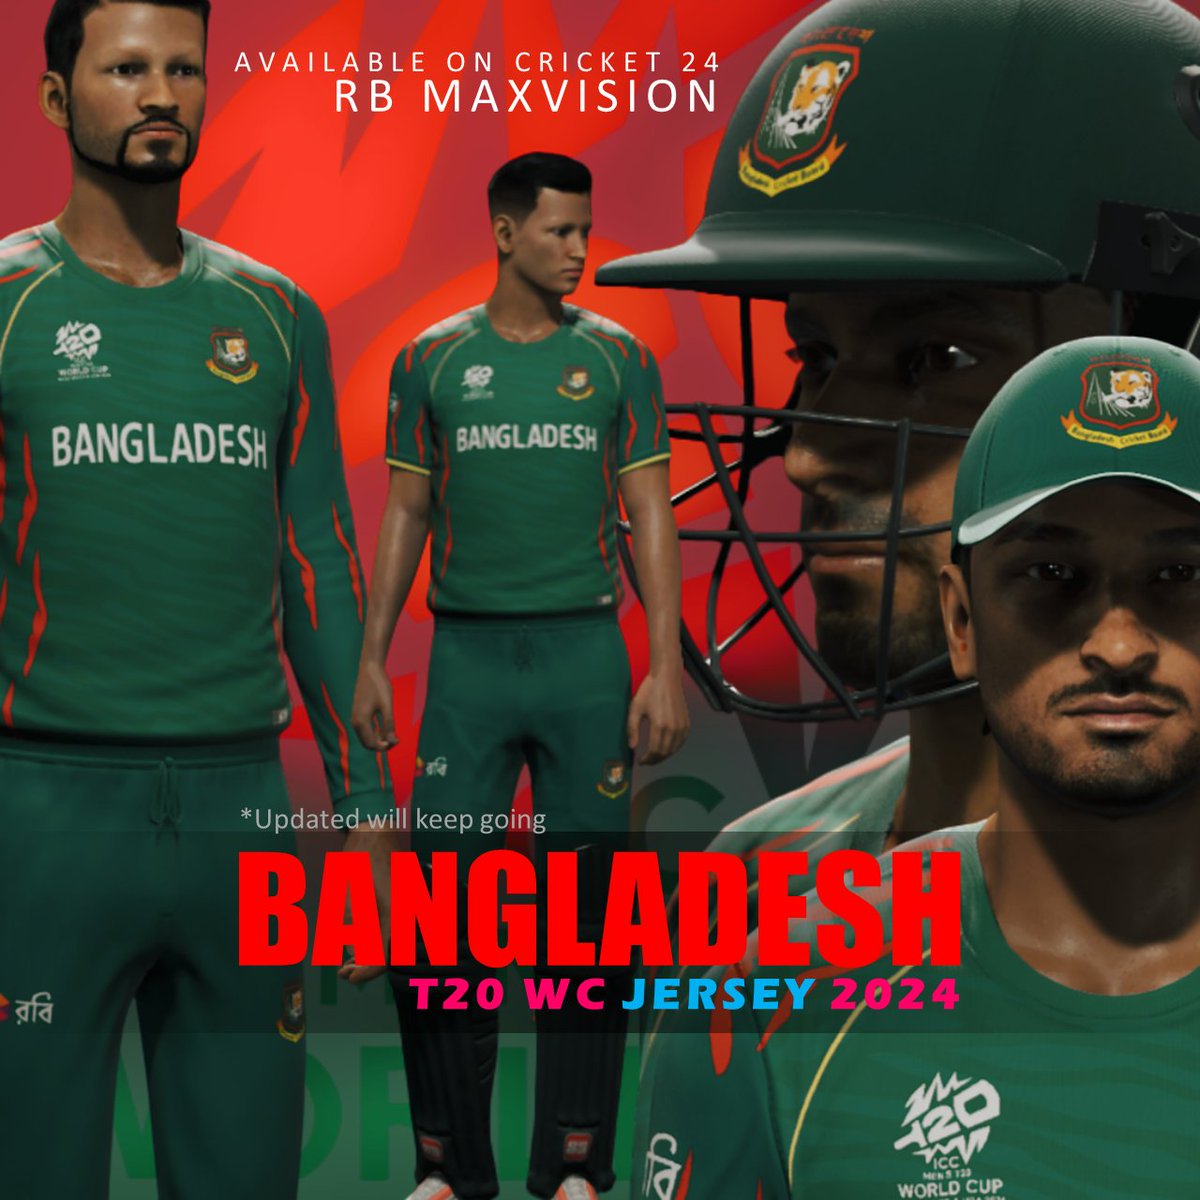 #Cricket24 | #Bangladesh T20 WC #Jersey 2024 is READY NOW | Available on Cricket 24 | Academy name : RB MaxVision
@AJMods99 @SinghalRahul96 @BCBtigers @ICC @T20WorldCup
#NewT20Jersey #NewJersey #T20WorldCup #BangladeshJersey #BangladeshNewJersey
#AJMods99 #SinghalRahul96